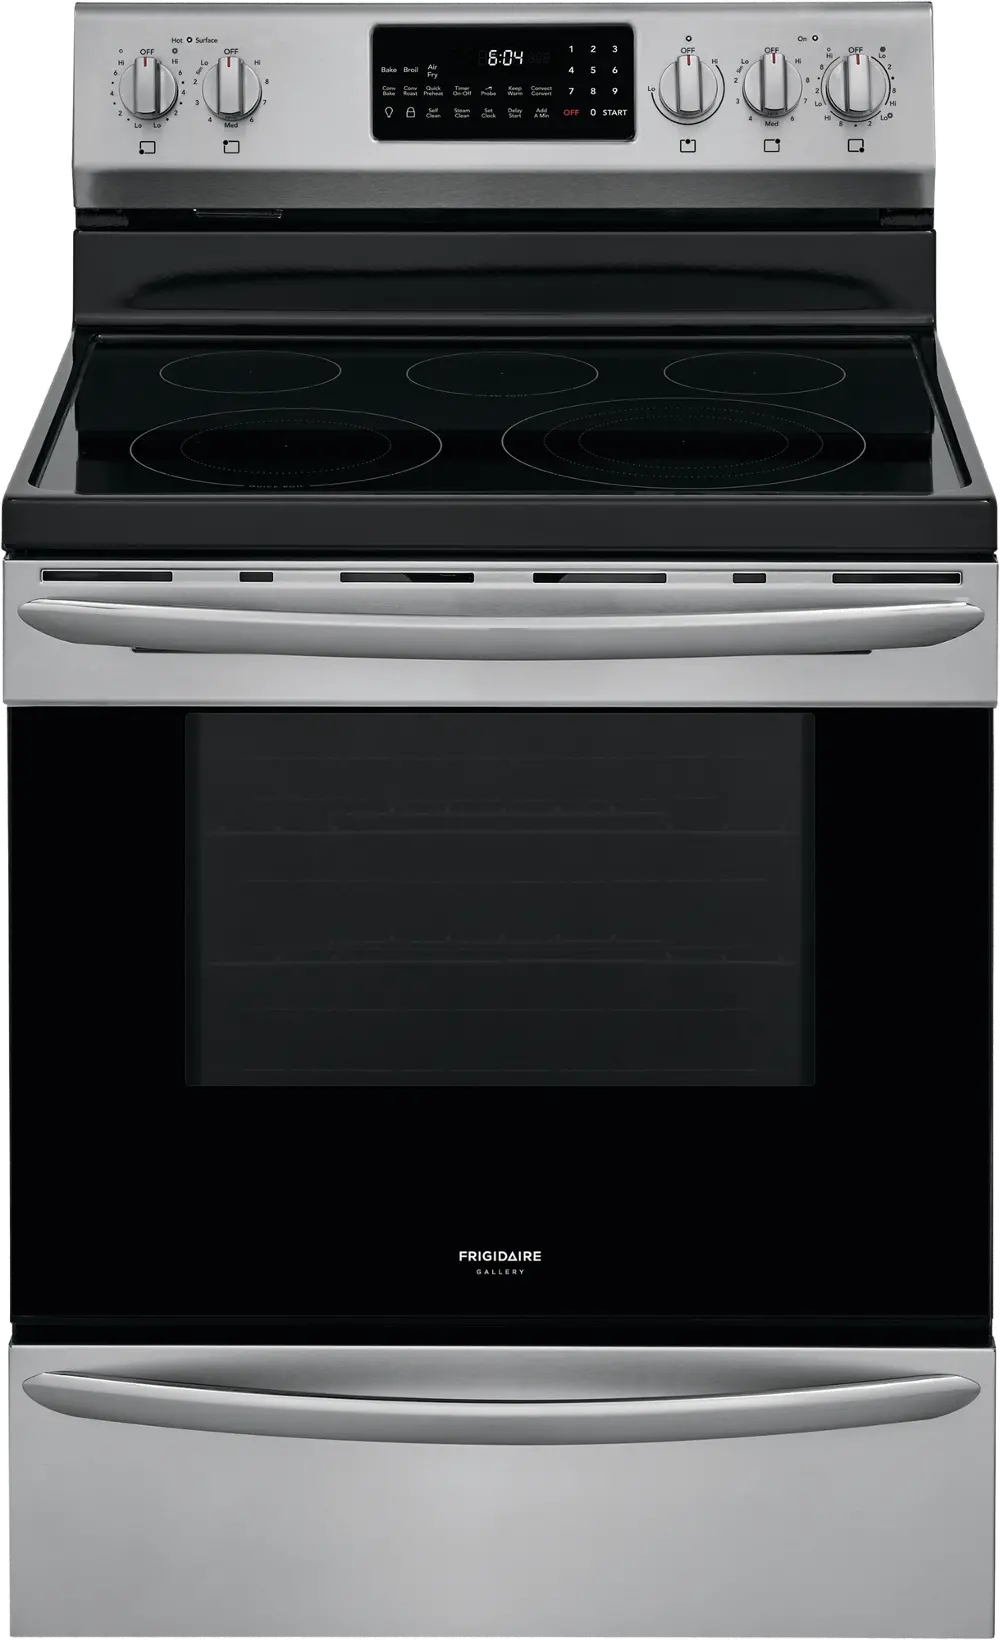 GCRE3060AF Frigidaire Gallery 5.7 cu ft Electric Range - Stainless Steel-1